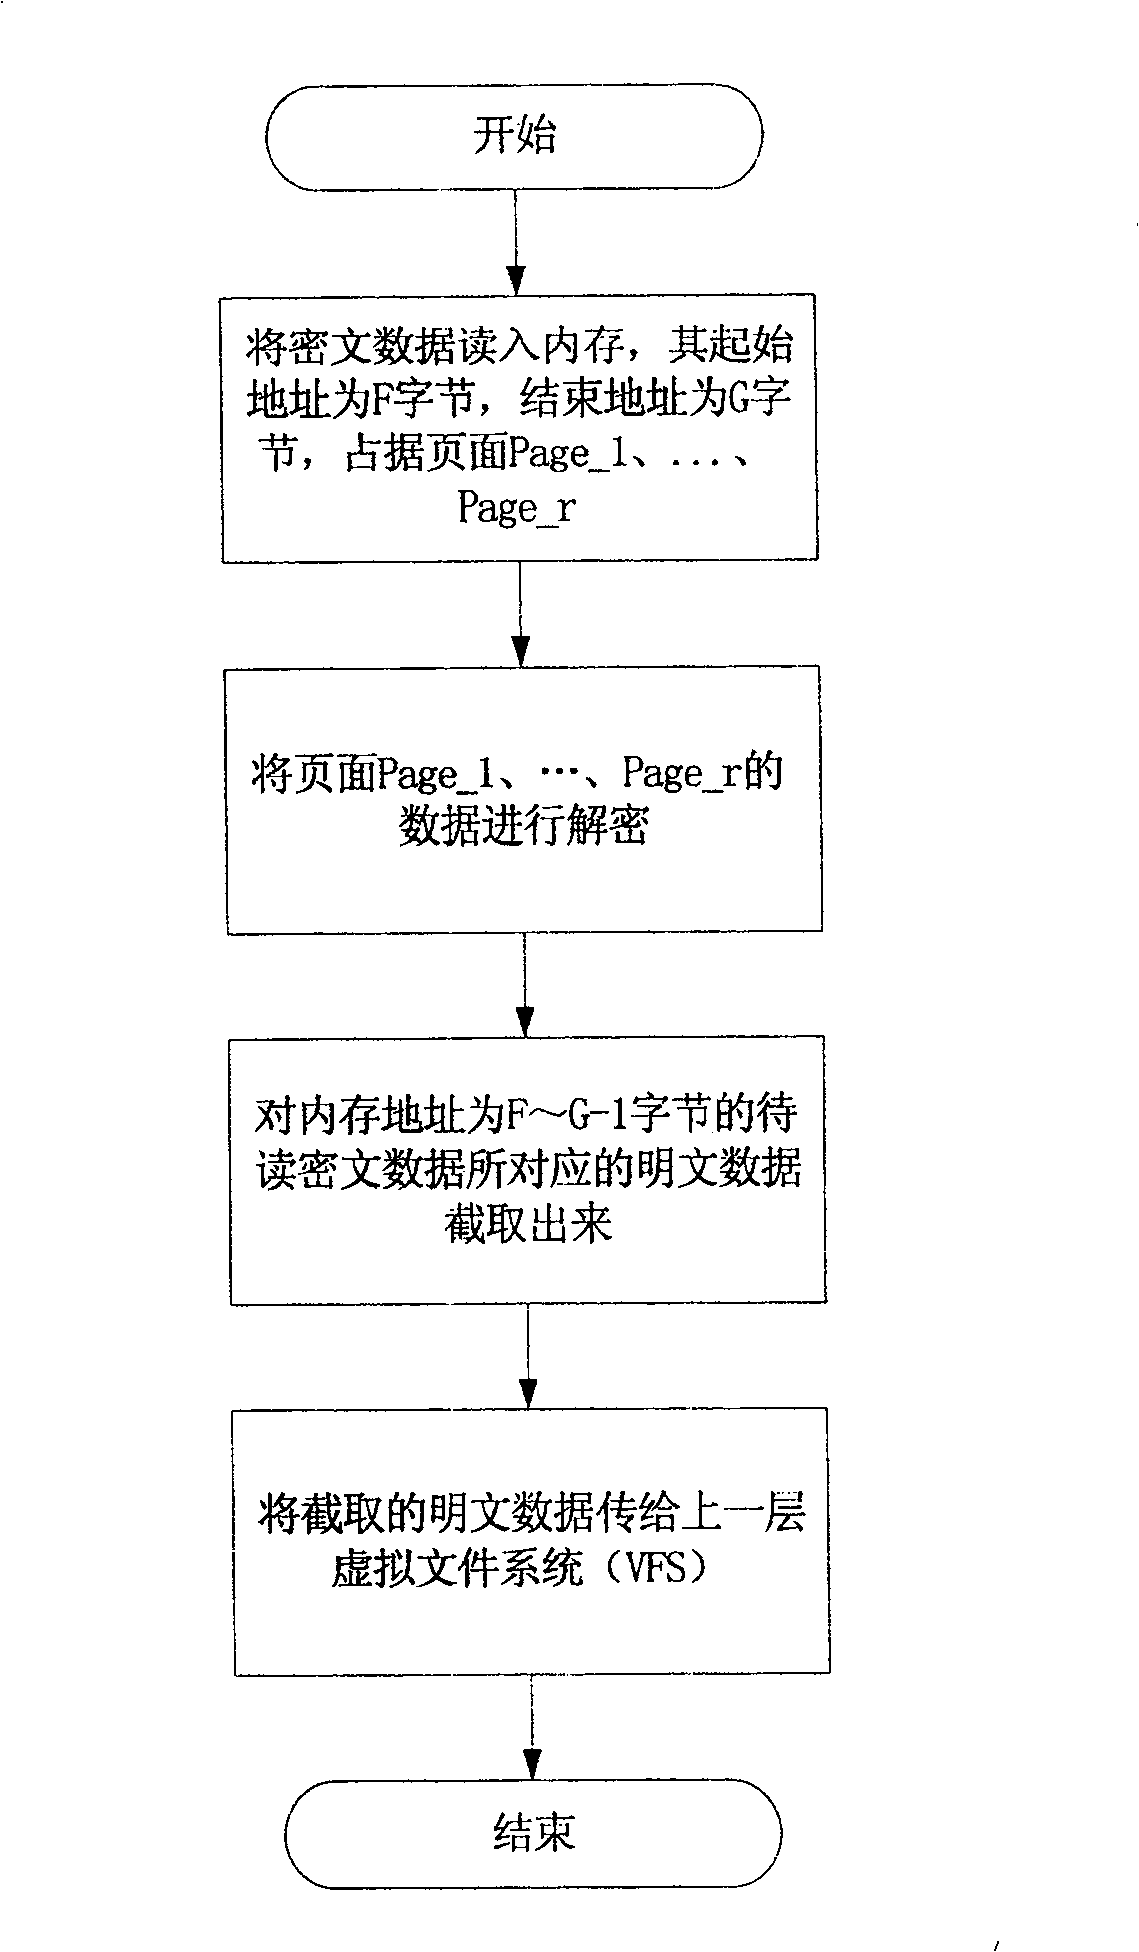 Encrypting read / write method in use for NAS storage system